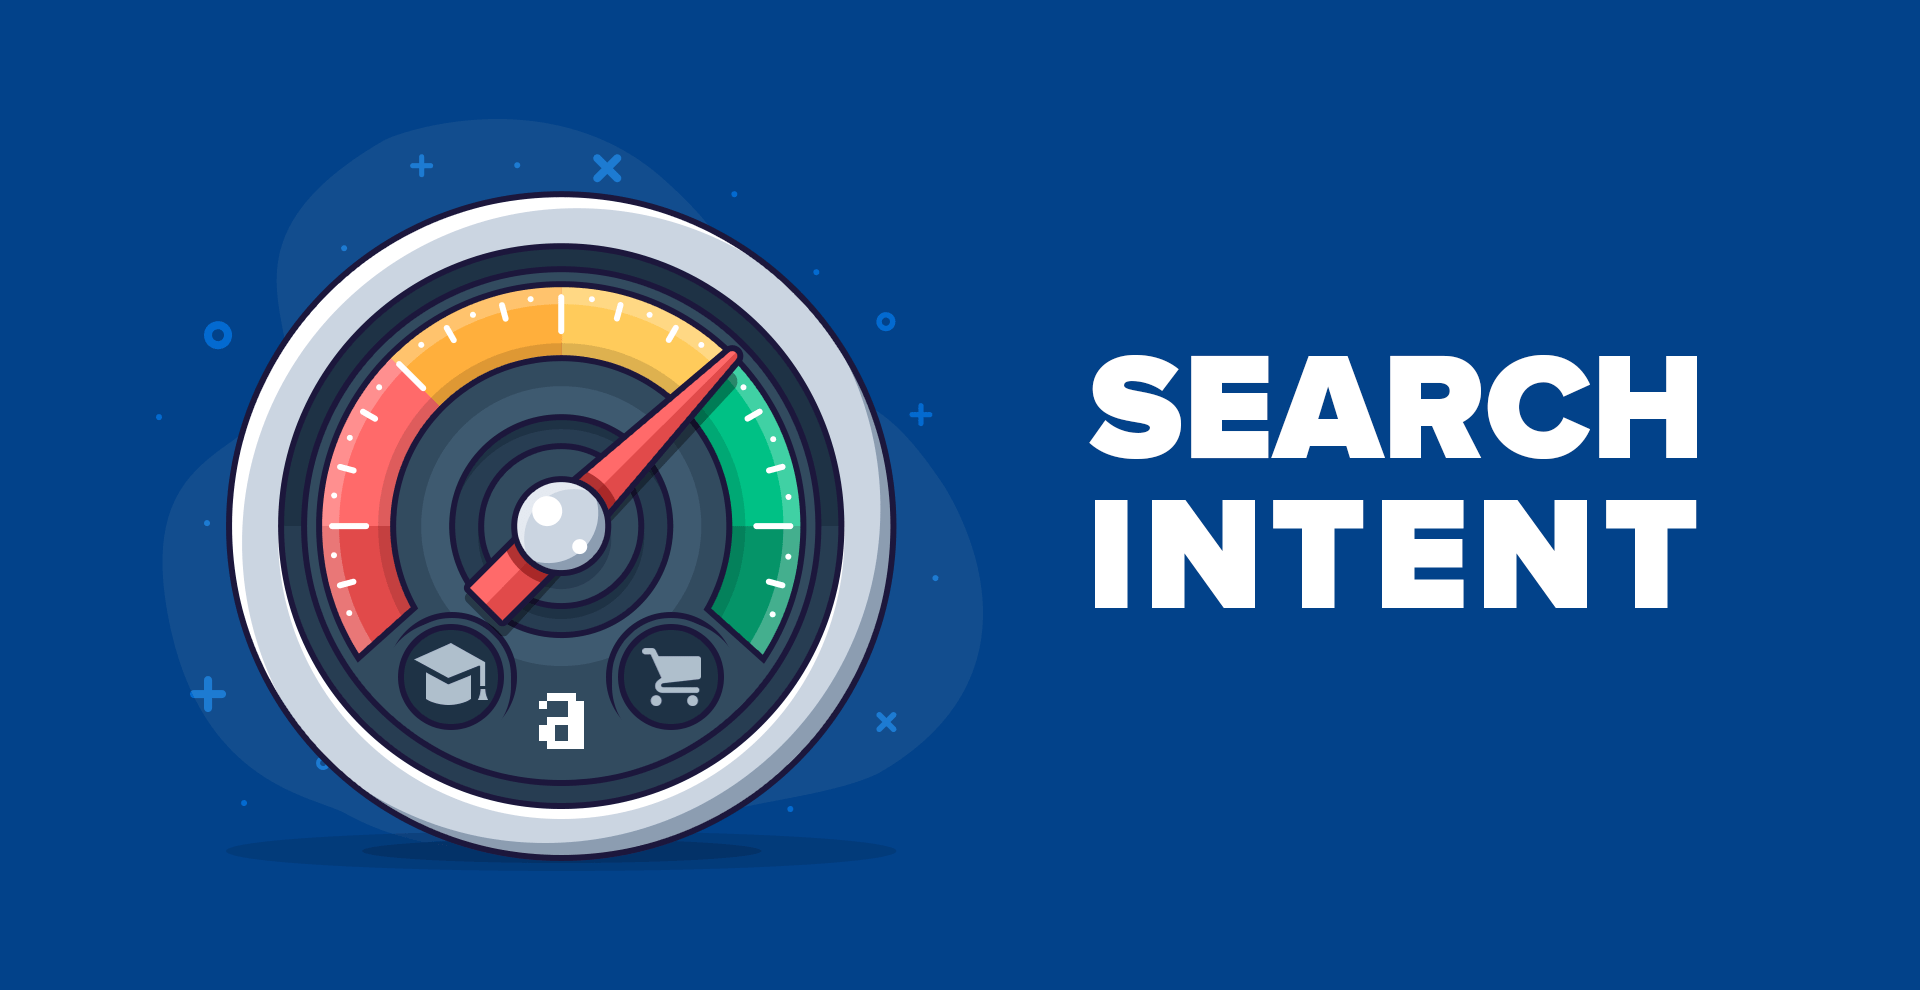 Search intent text